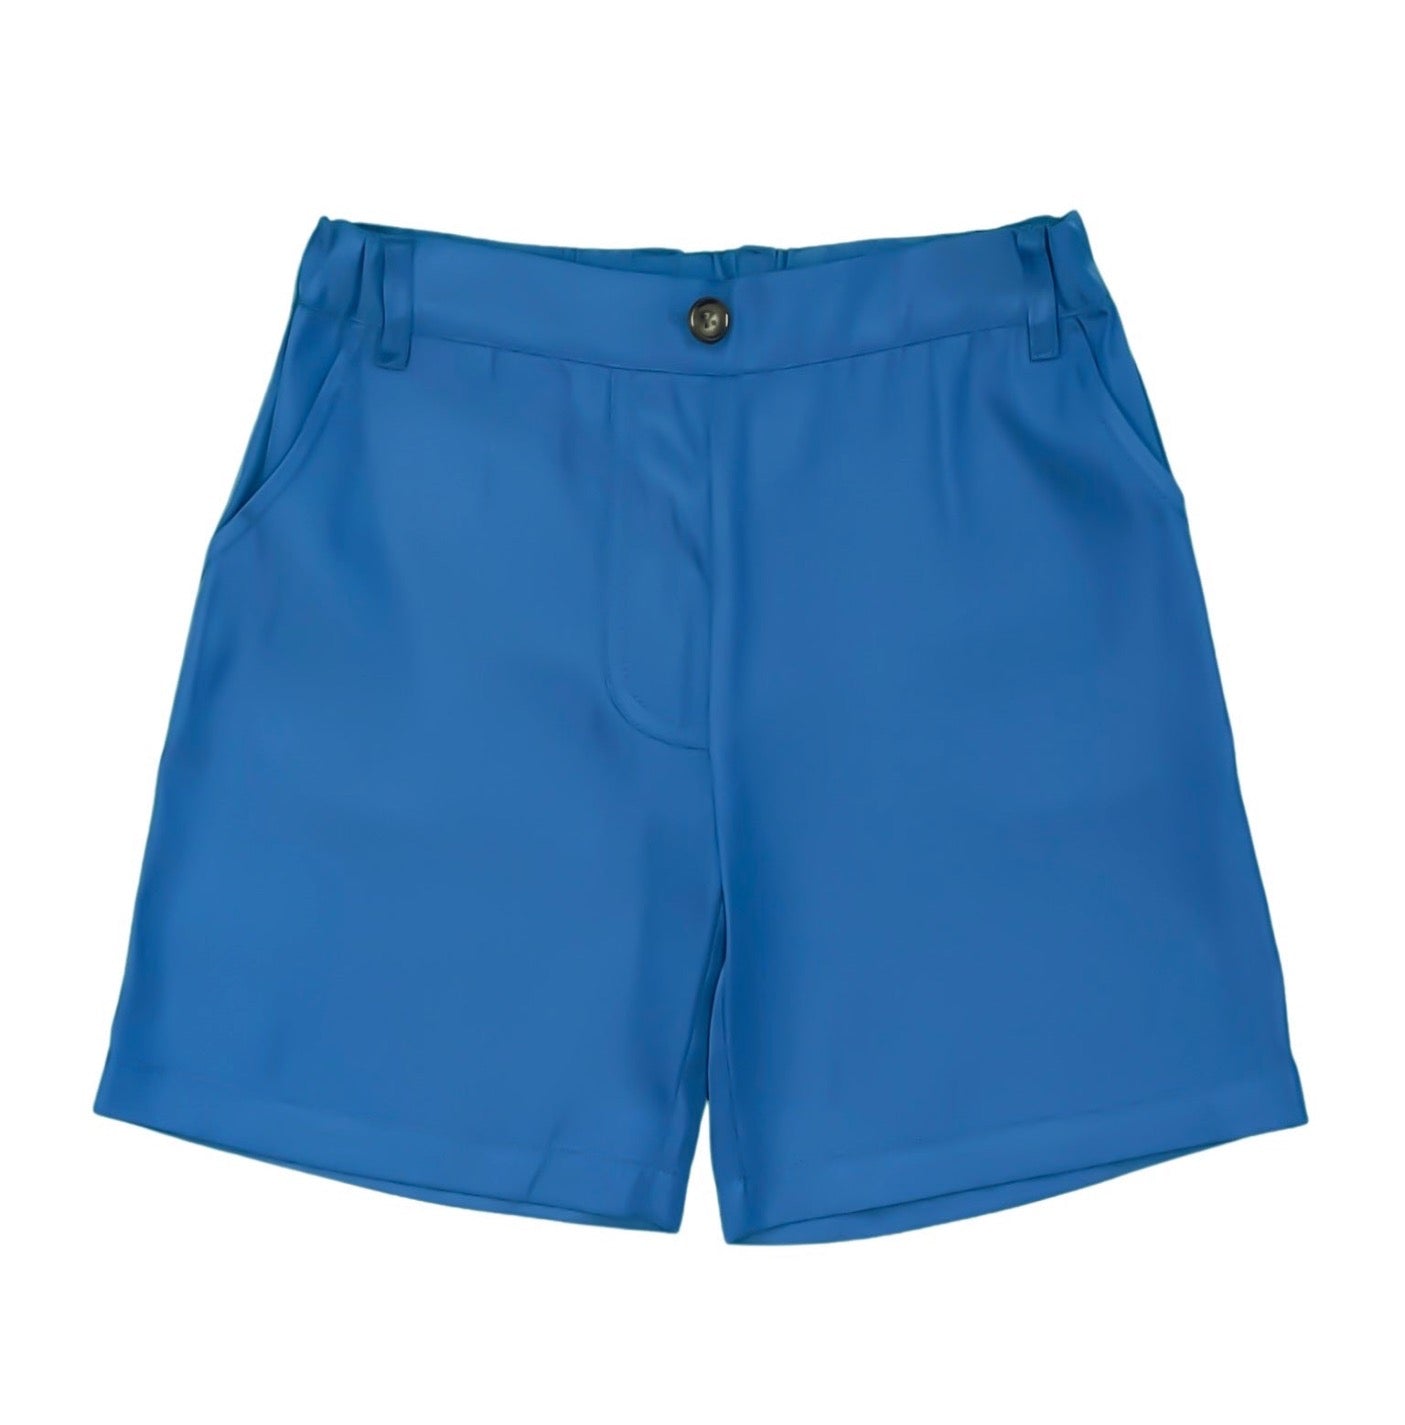 Ponce Performance Shorts Teal